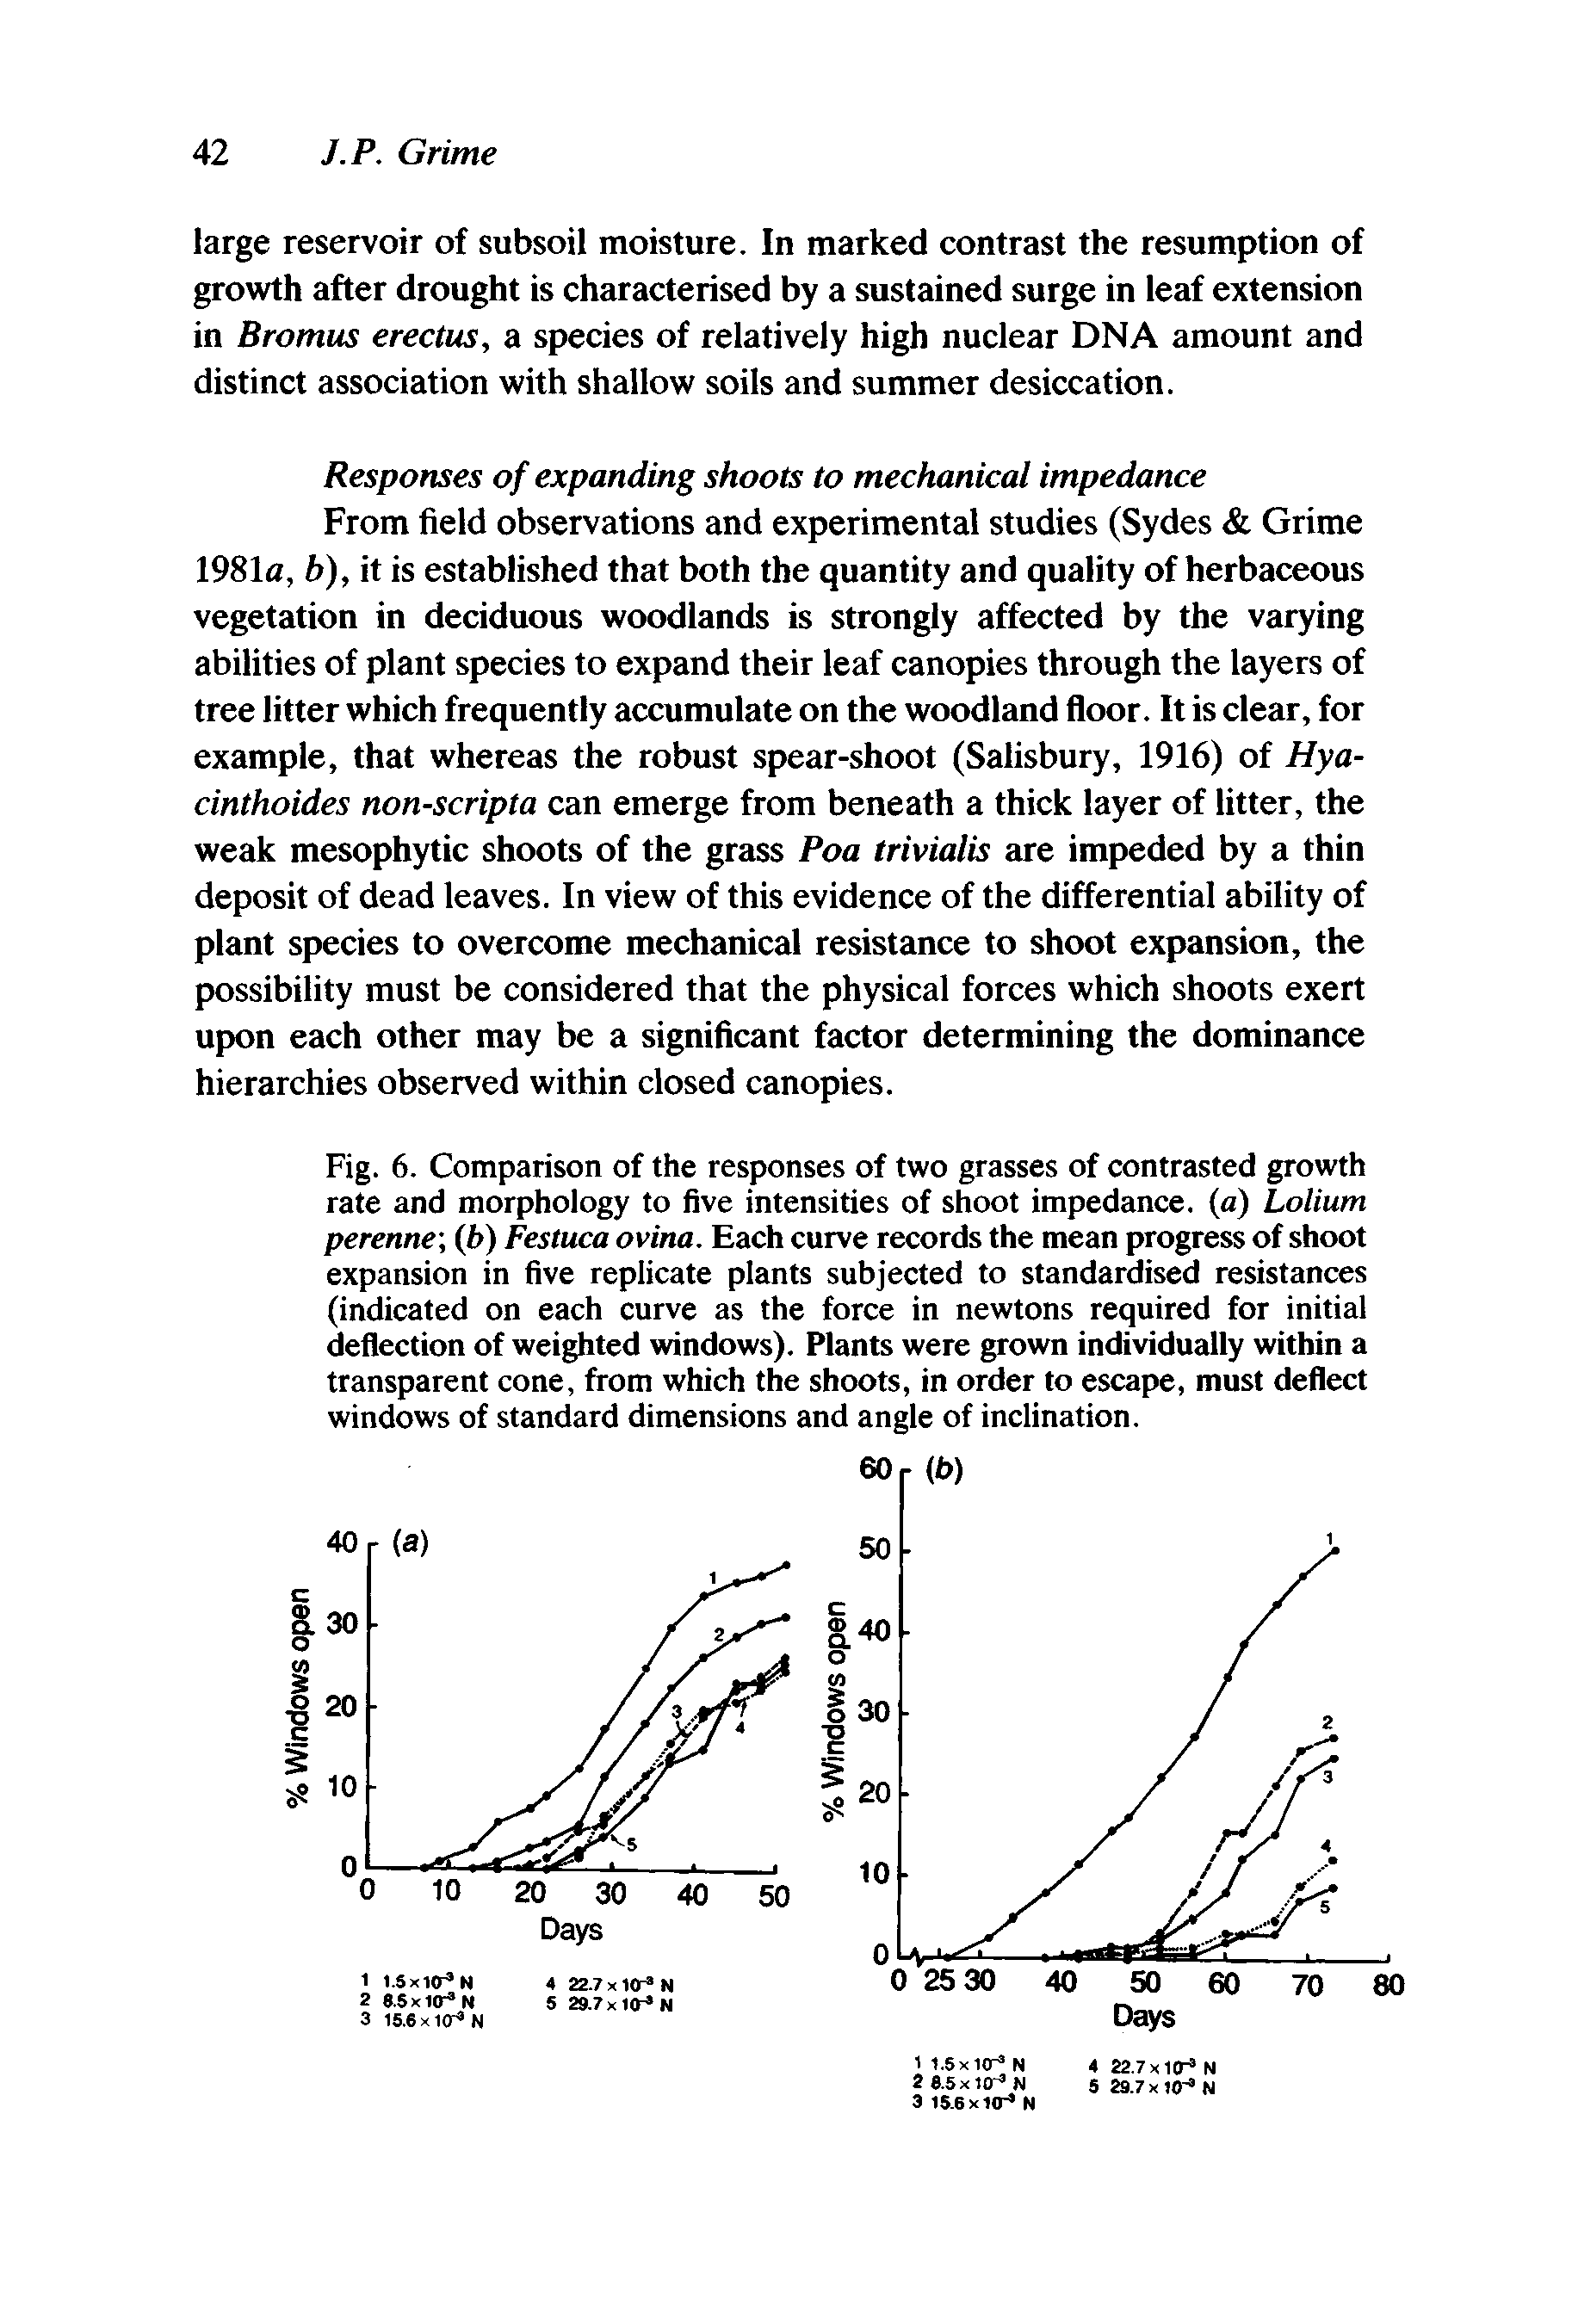 Fig. 6. Comparison of the responses of two grasses of contrasted growth rate and morphology to five intensities of shoot impedance, (a) Lolium perenne b) Festuca ovina. Each curve records the mean progress of shoot expansion in five replicate plants subjected to standardised resistances (indicated on each curve as the force in newtons required for initial deflection of weighted windows). Plants were grown individually within a transparent cone, from which the shoots, in order to escape, must deflect windows of standard dimensions and angle of inclination.